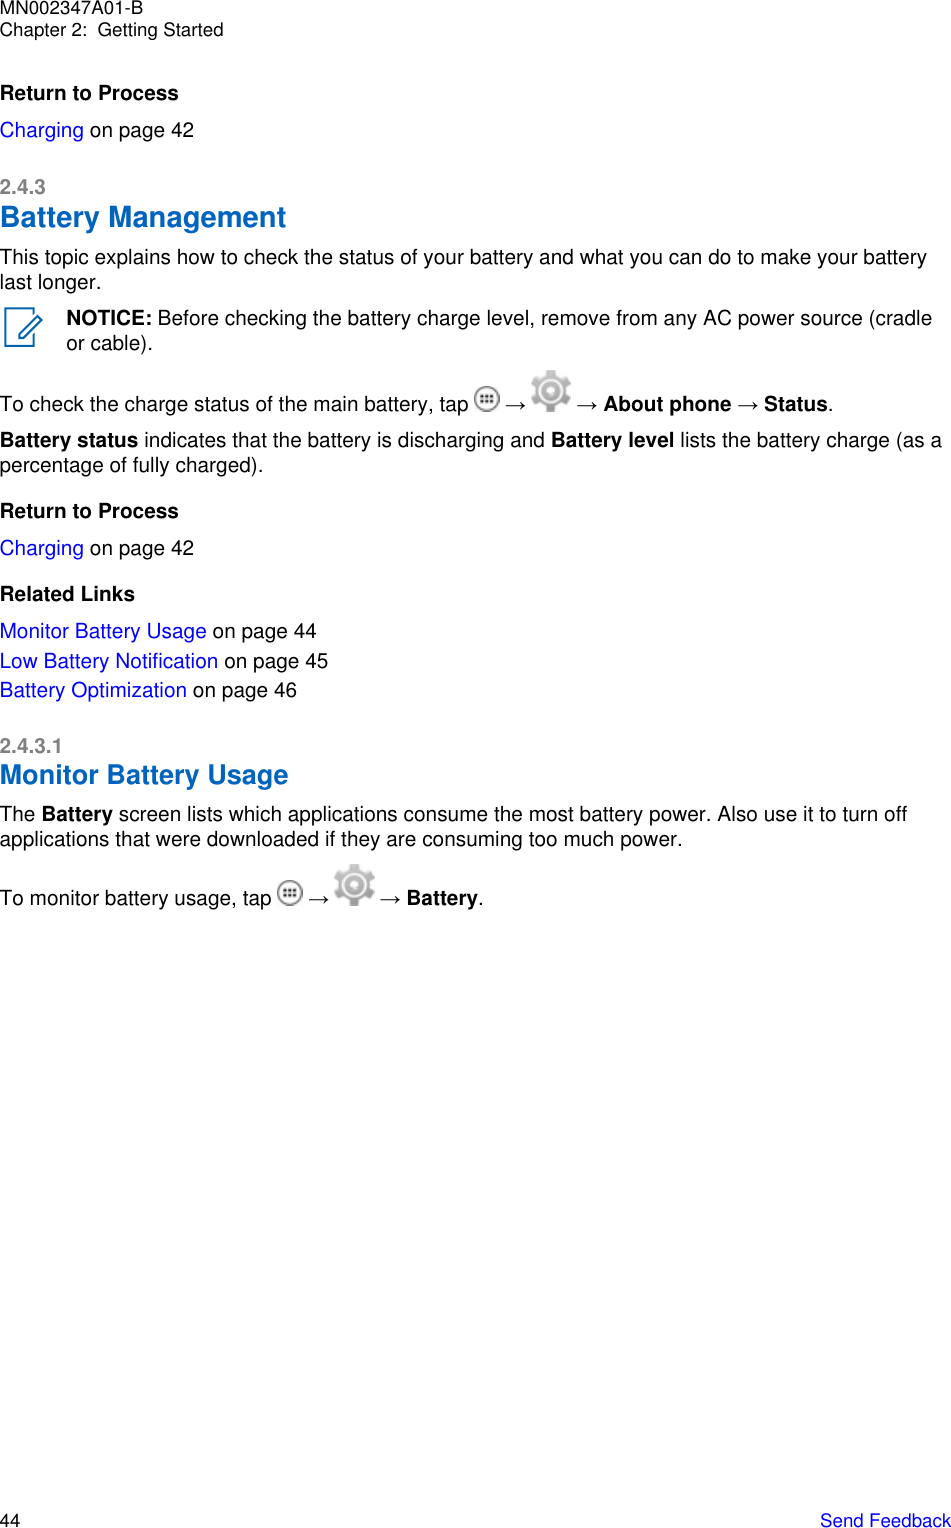 Return to ProcessCharging on page 422.4.3Battery ManagementThis topic explains how to check the status of your battery and what you can do to make your batterylast longer.NOTICE: Before checking the battery charge level, remove from any AC power source (cradleor cable).To check the charge status of the main battery, tap   →   → About phone → Status.Battery status indicates that the battery is discharging and Battery level lists the battery charge (as apercentage of fully charged).Return to ProcessCharging on page 42Related LinksMonitor Battery Usage on page 44Low Battery Notification on page 45Battery Optimization on page 462.4.3.1Monitor Battery UsageThe Battery screen lists which applications consume the most battery power. Also use it to turn offapplications that were downloaded if they are consuming too much power.To monitor battery usage, tap   →   → Battery.MN002347A01-BChapter 2:  Getting Started44   Send Feedback